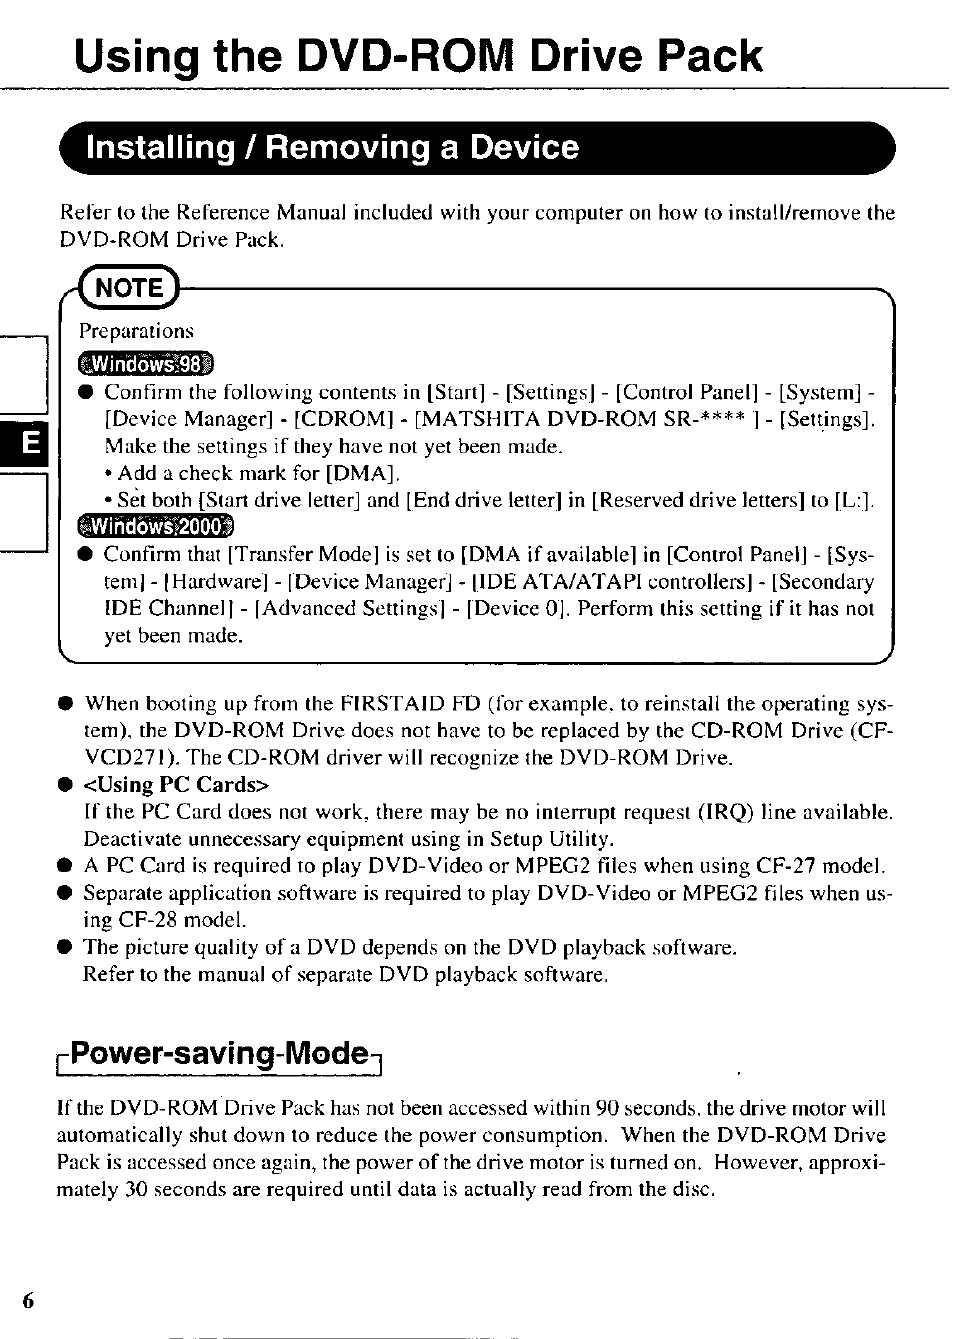 Using the dvd-rom drive pack, Installing / removing a device, Power-saving-mode | Panasonic DVD-ROM CF-VDD283 Manuel d'utilisation | Page 6 / 36